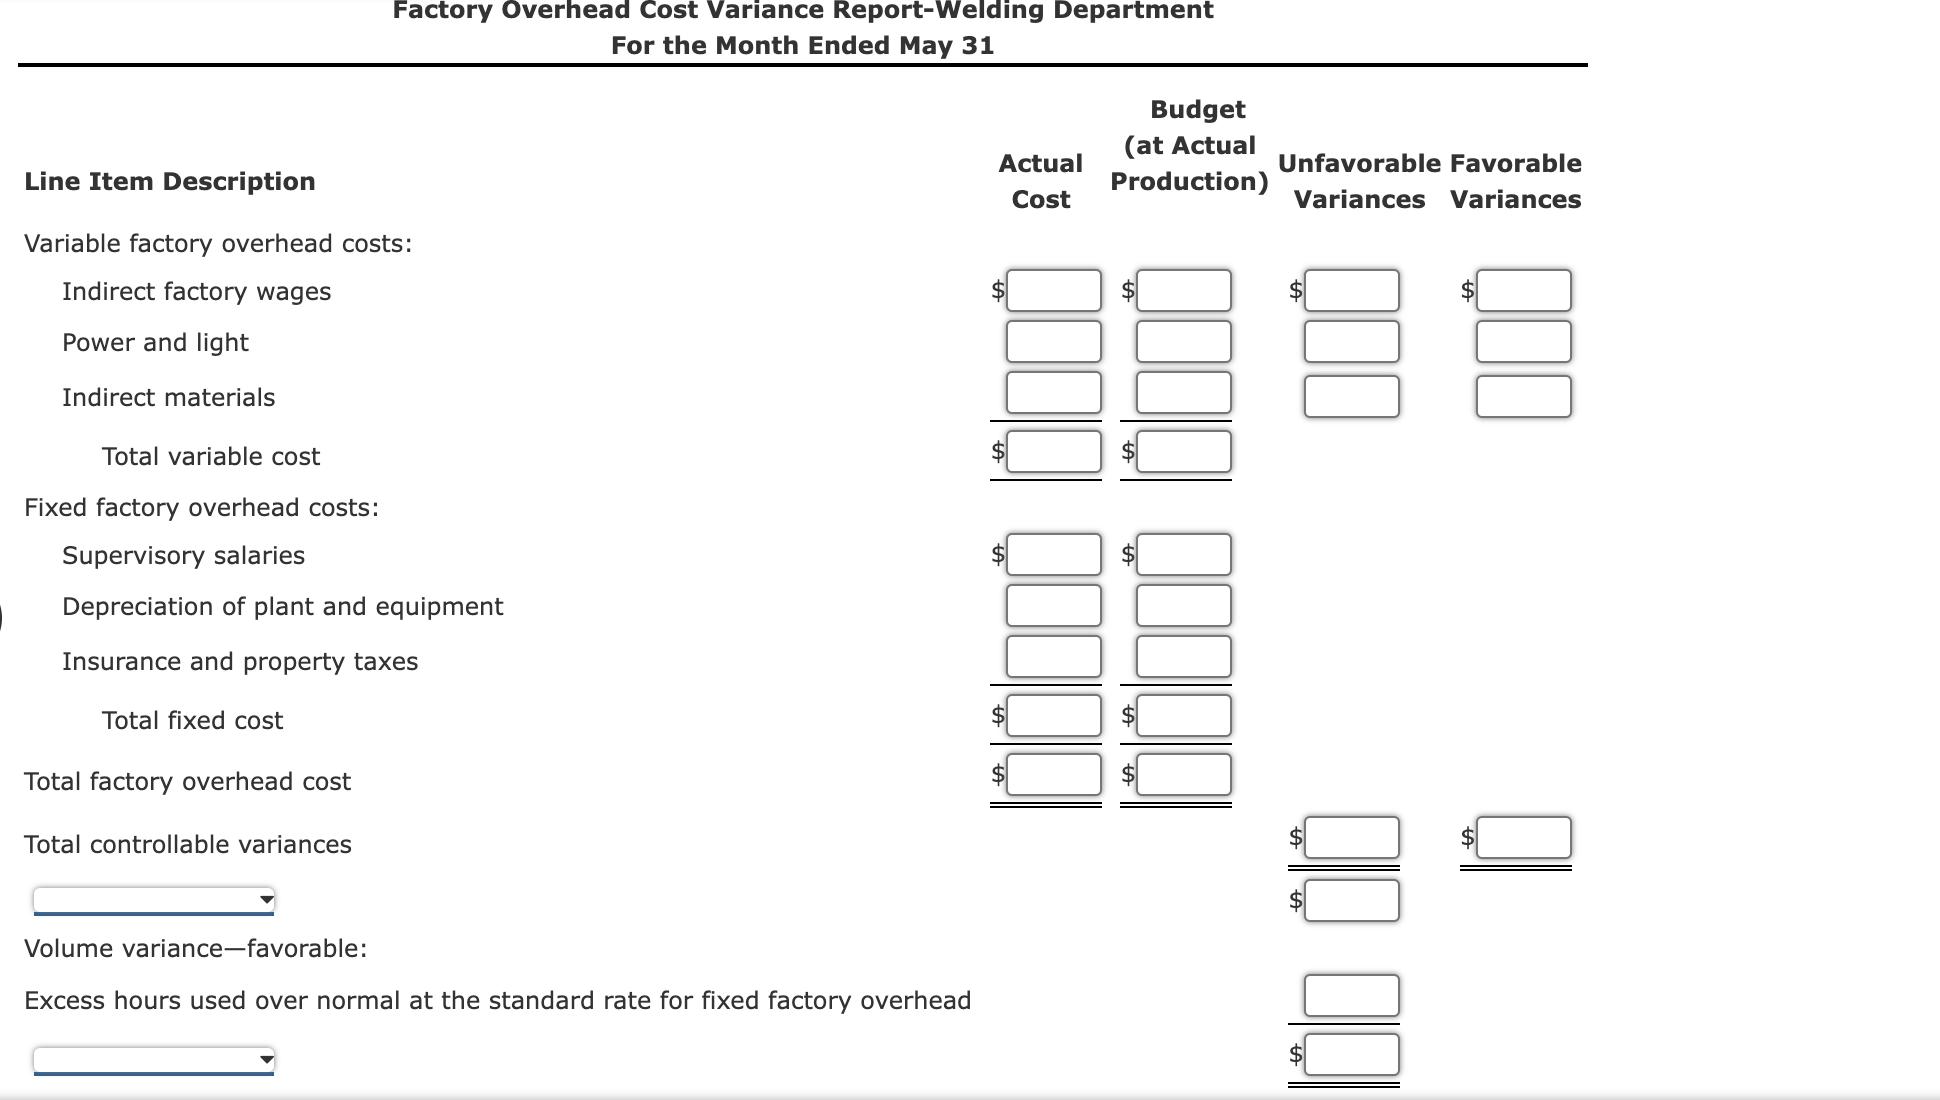 1 Line Item Description Variable factory overhead costs: Indirect factory wages Power and light Indirect